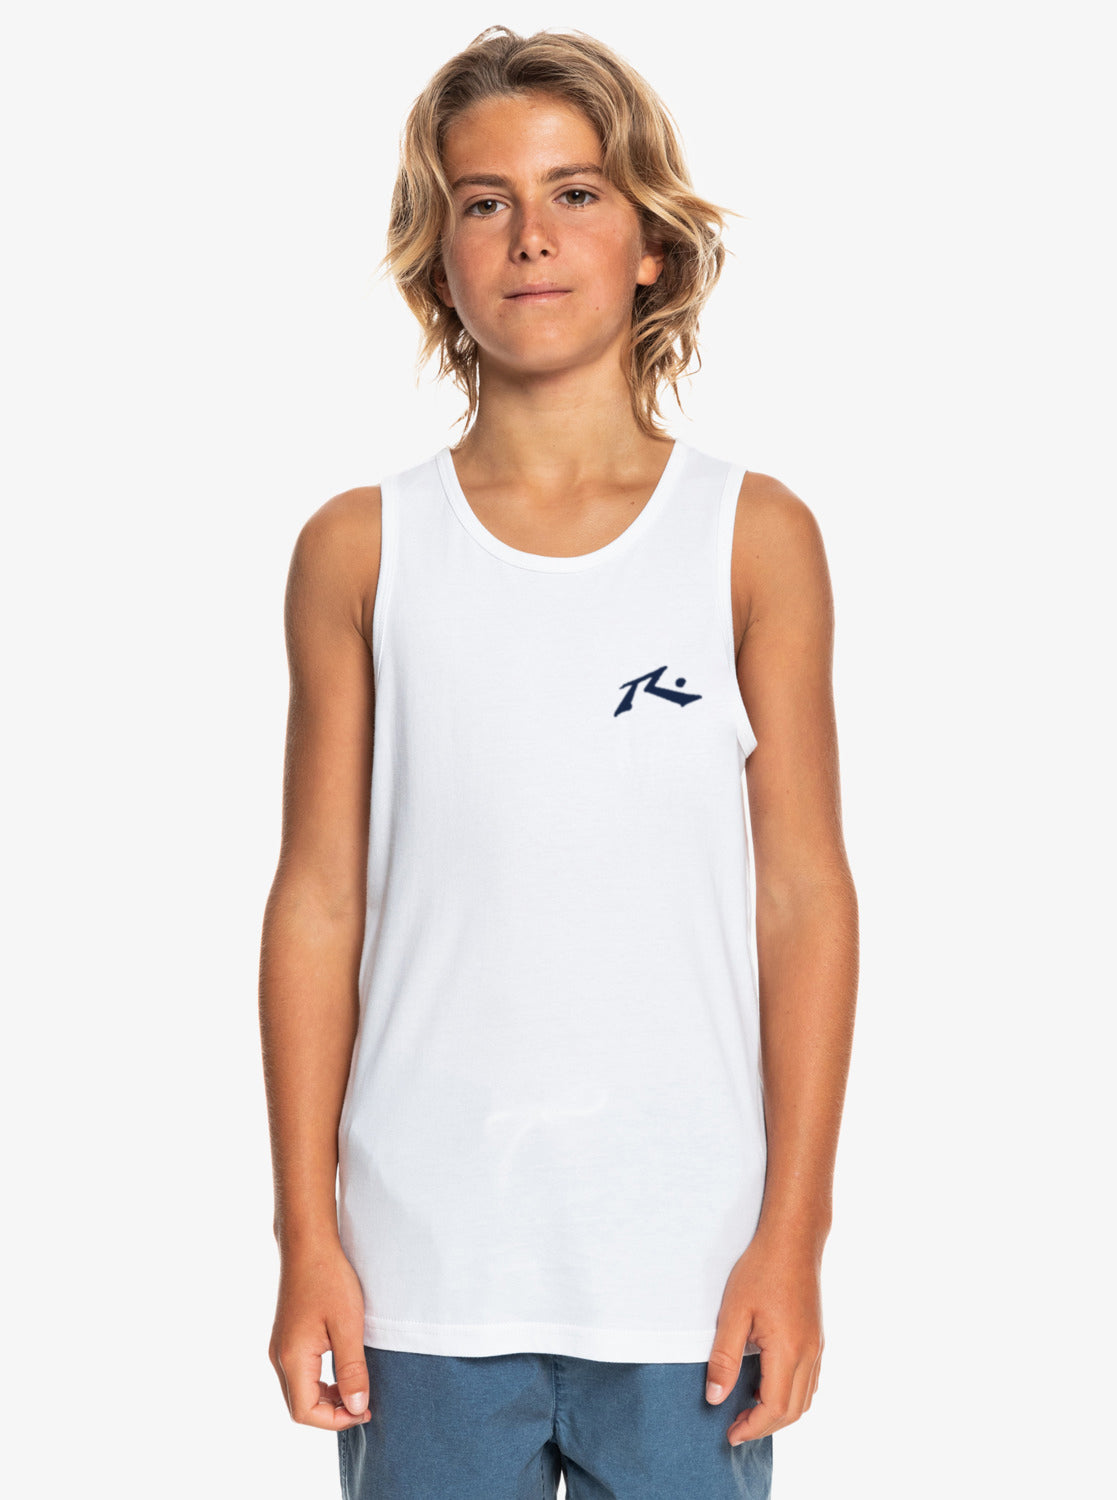 Musculosa Kyle  Jr White